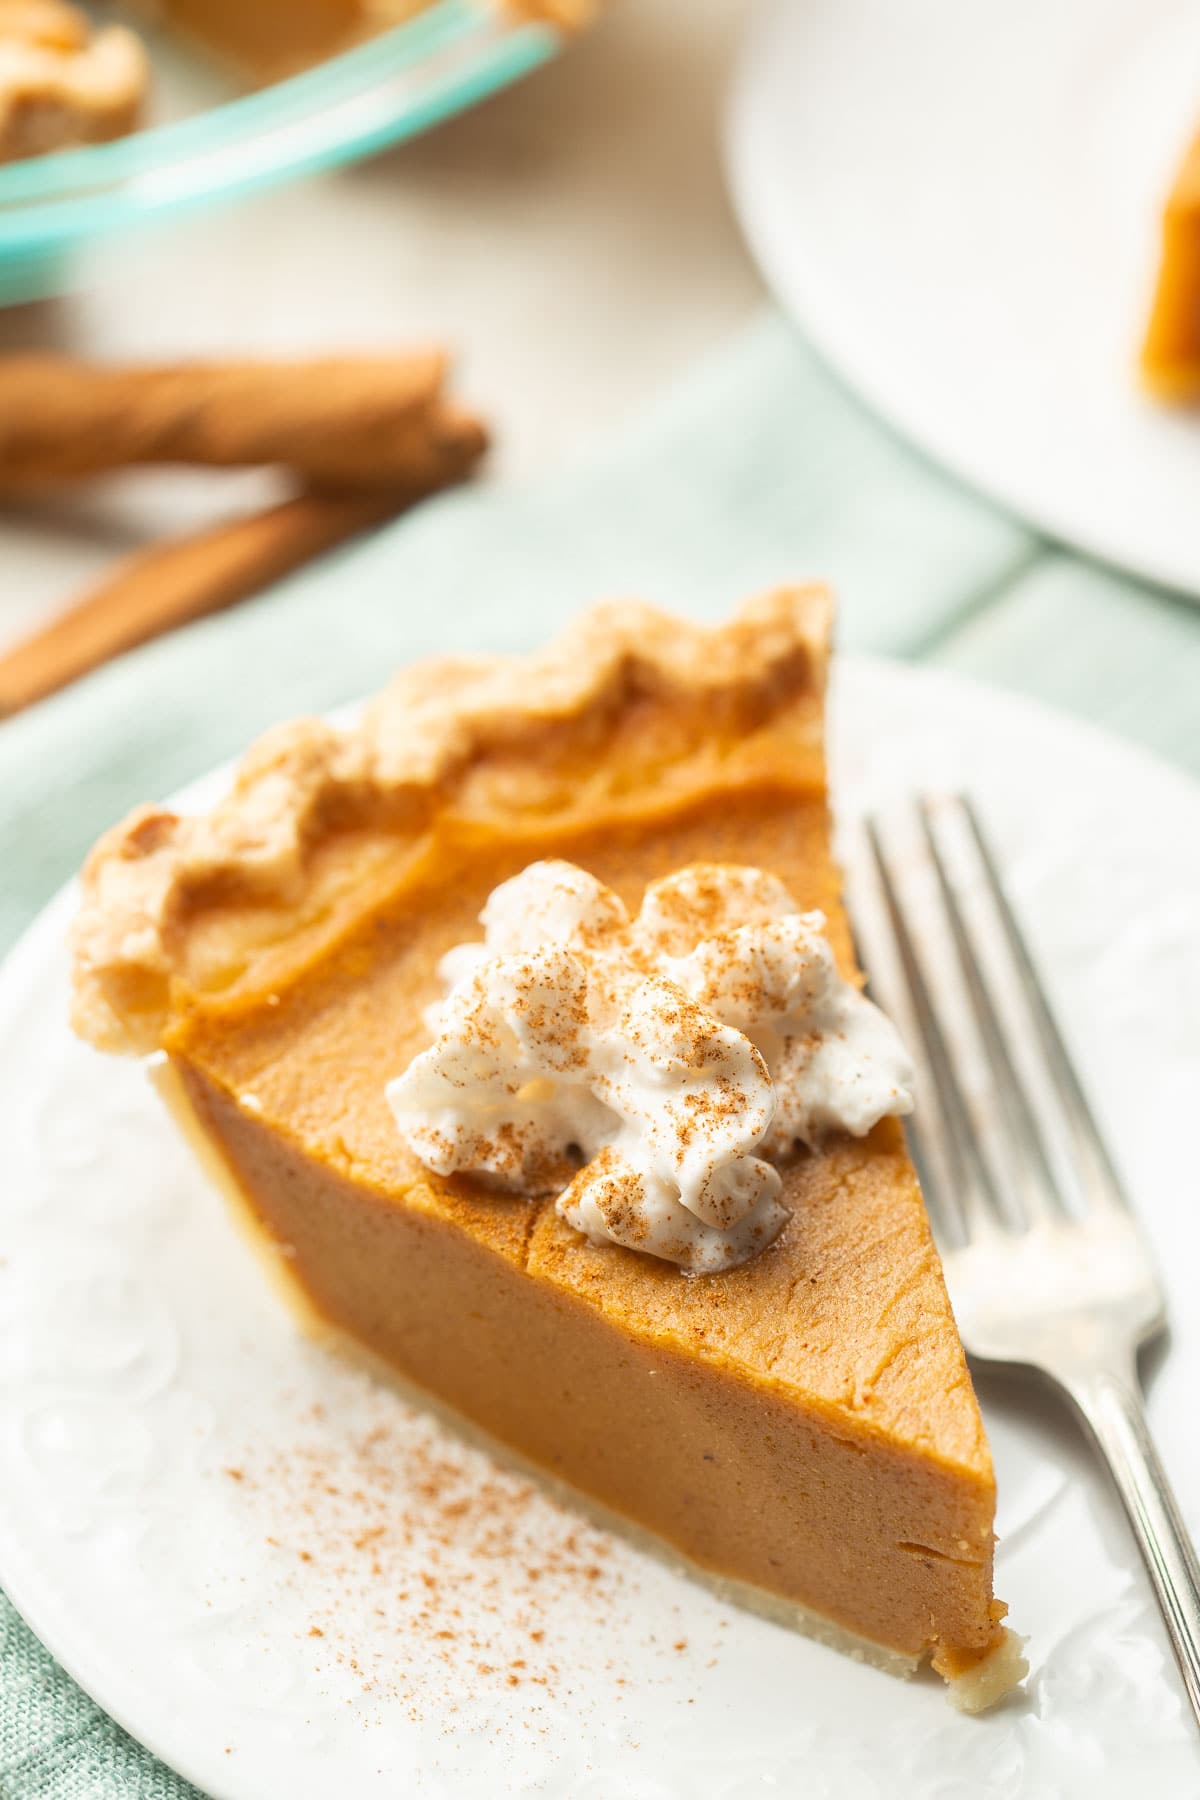 Slice of Vegan Sweet Potato Pie topped with whipped cream and cinnamon on a dish.